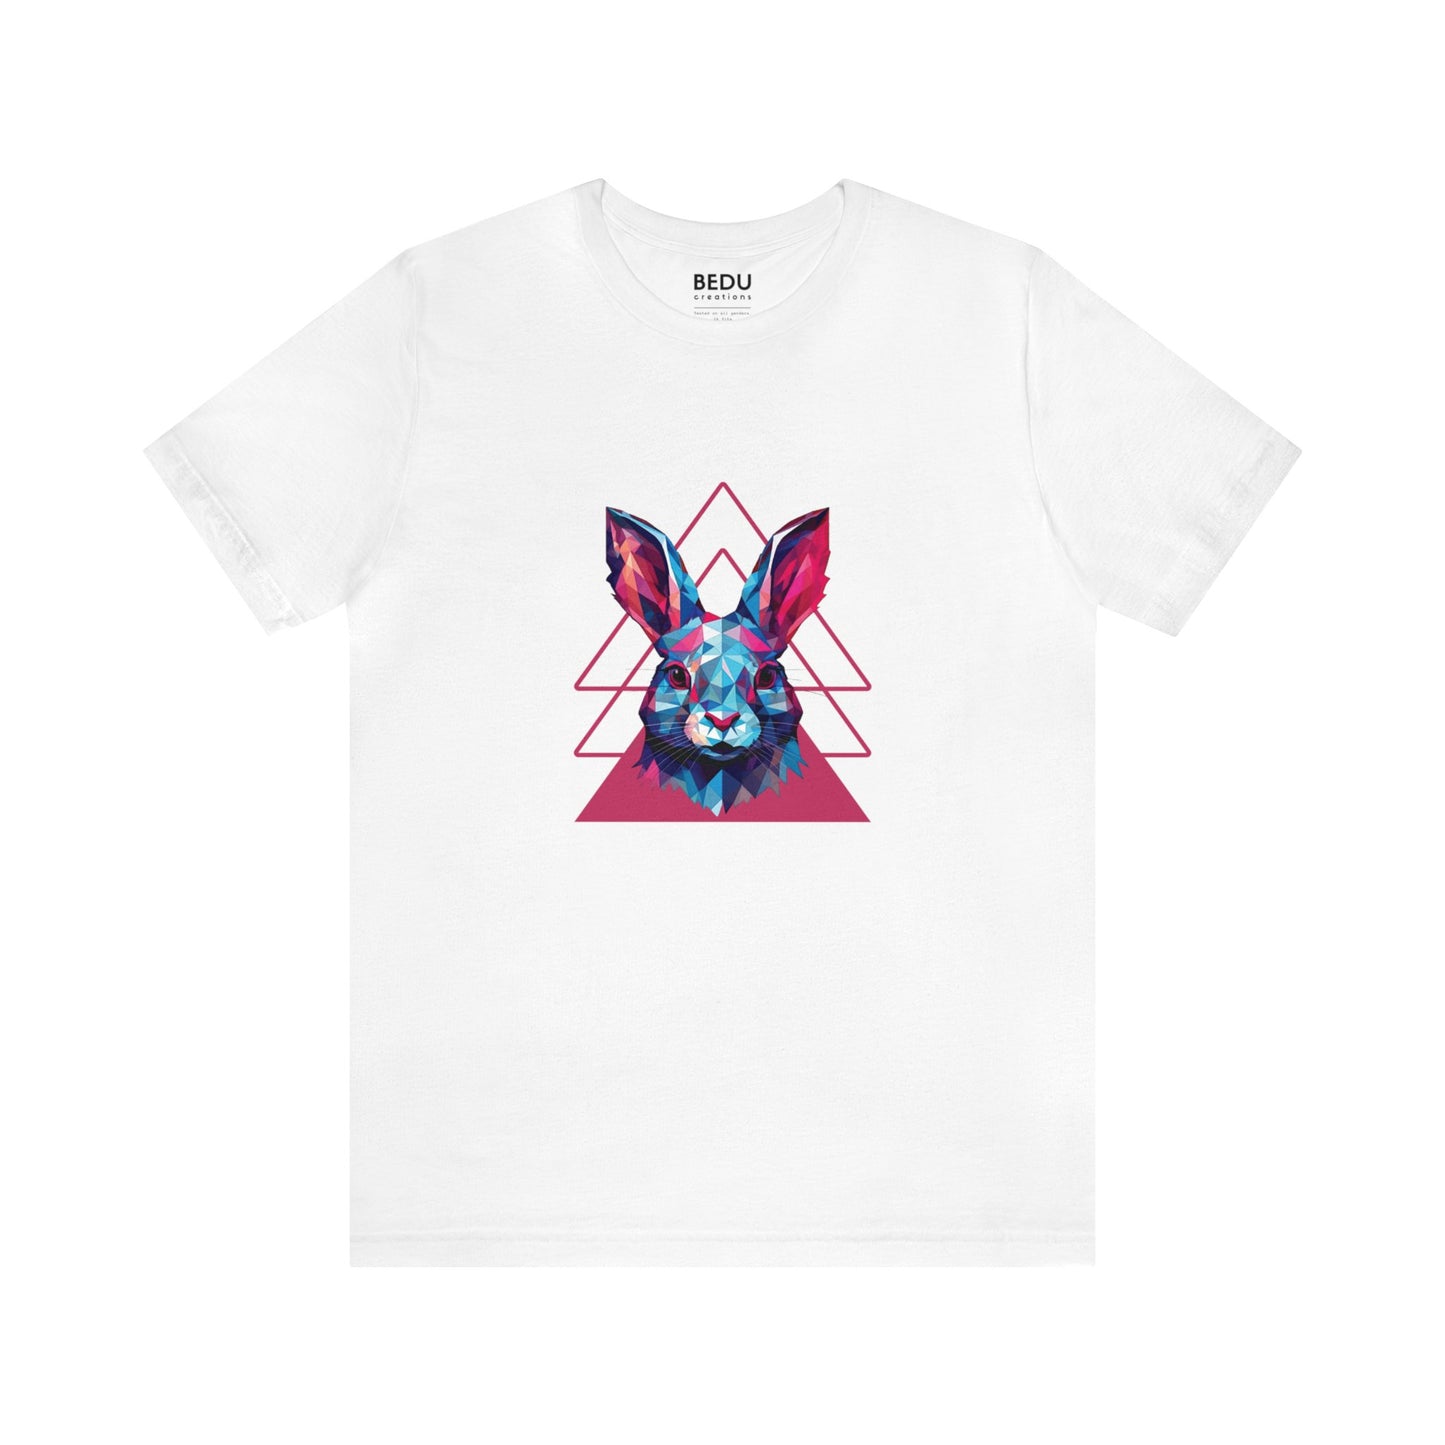 Rabbit Geometry Tee: Hop into a World of Color and Compassion